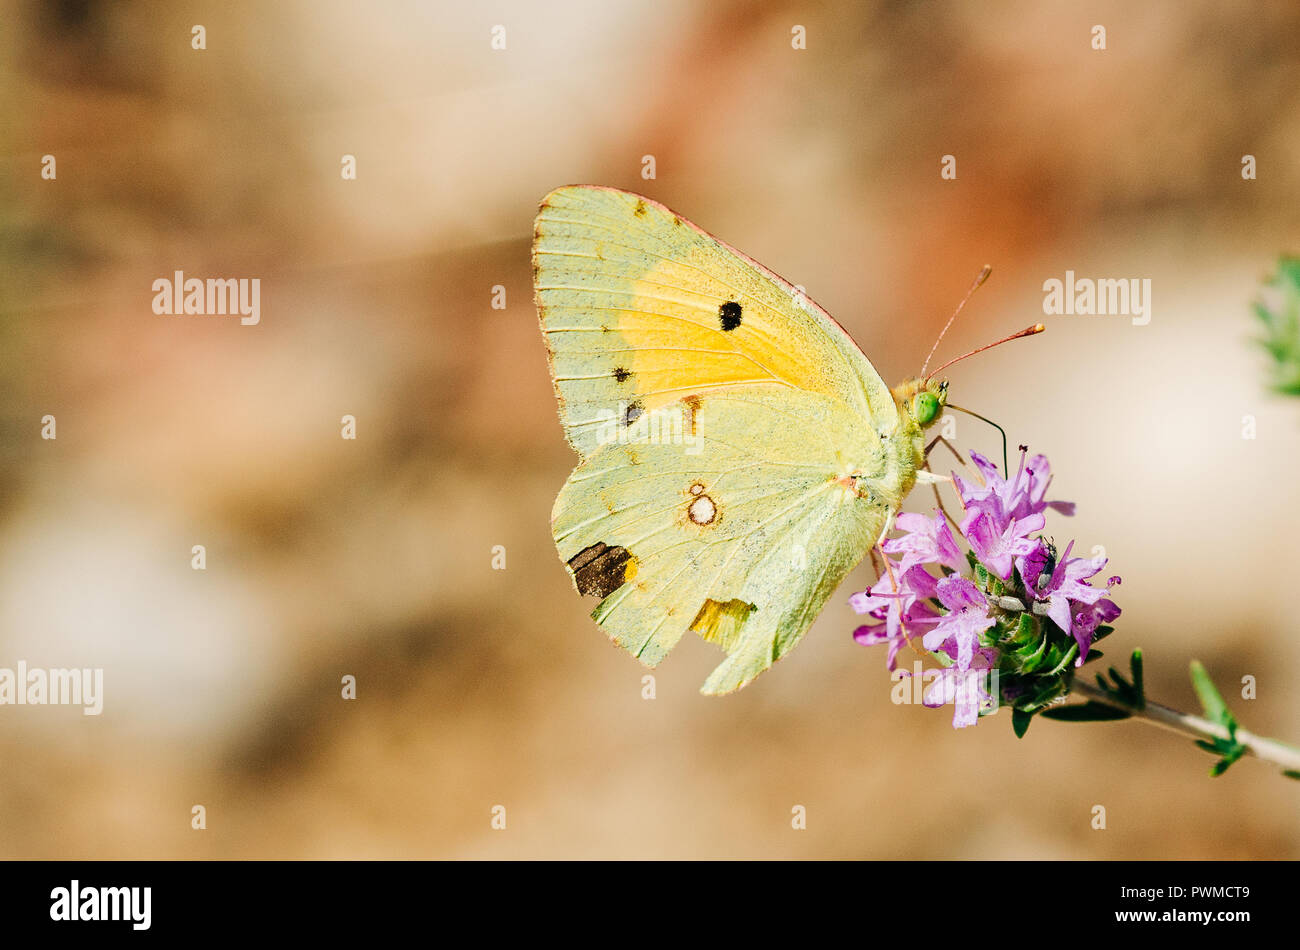 close up photography, green and yellow butterfly with purple flowers Stock Photo